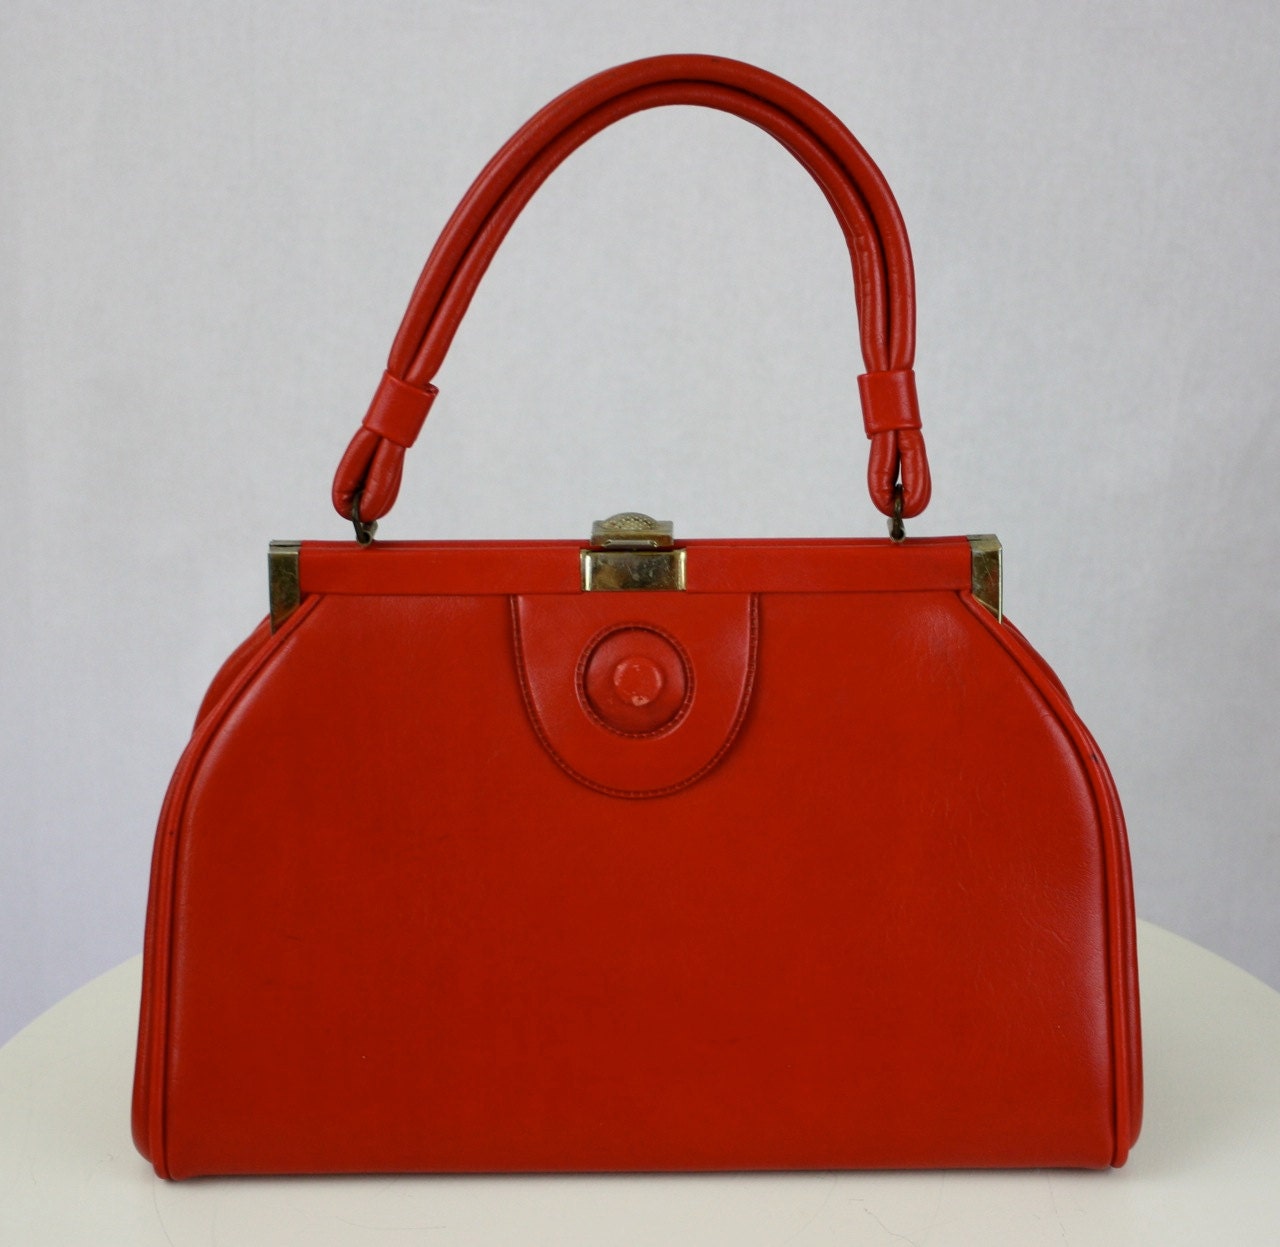 Vintage 1960s Red Purse Handbag Faux Leather w Brass Clasp - foreveracharm